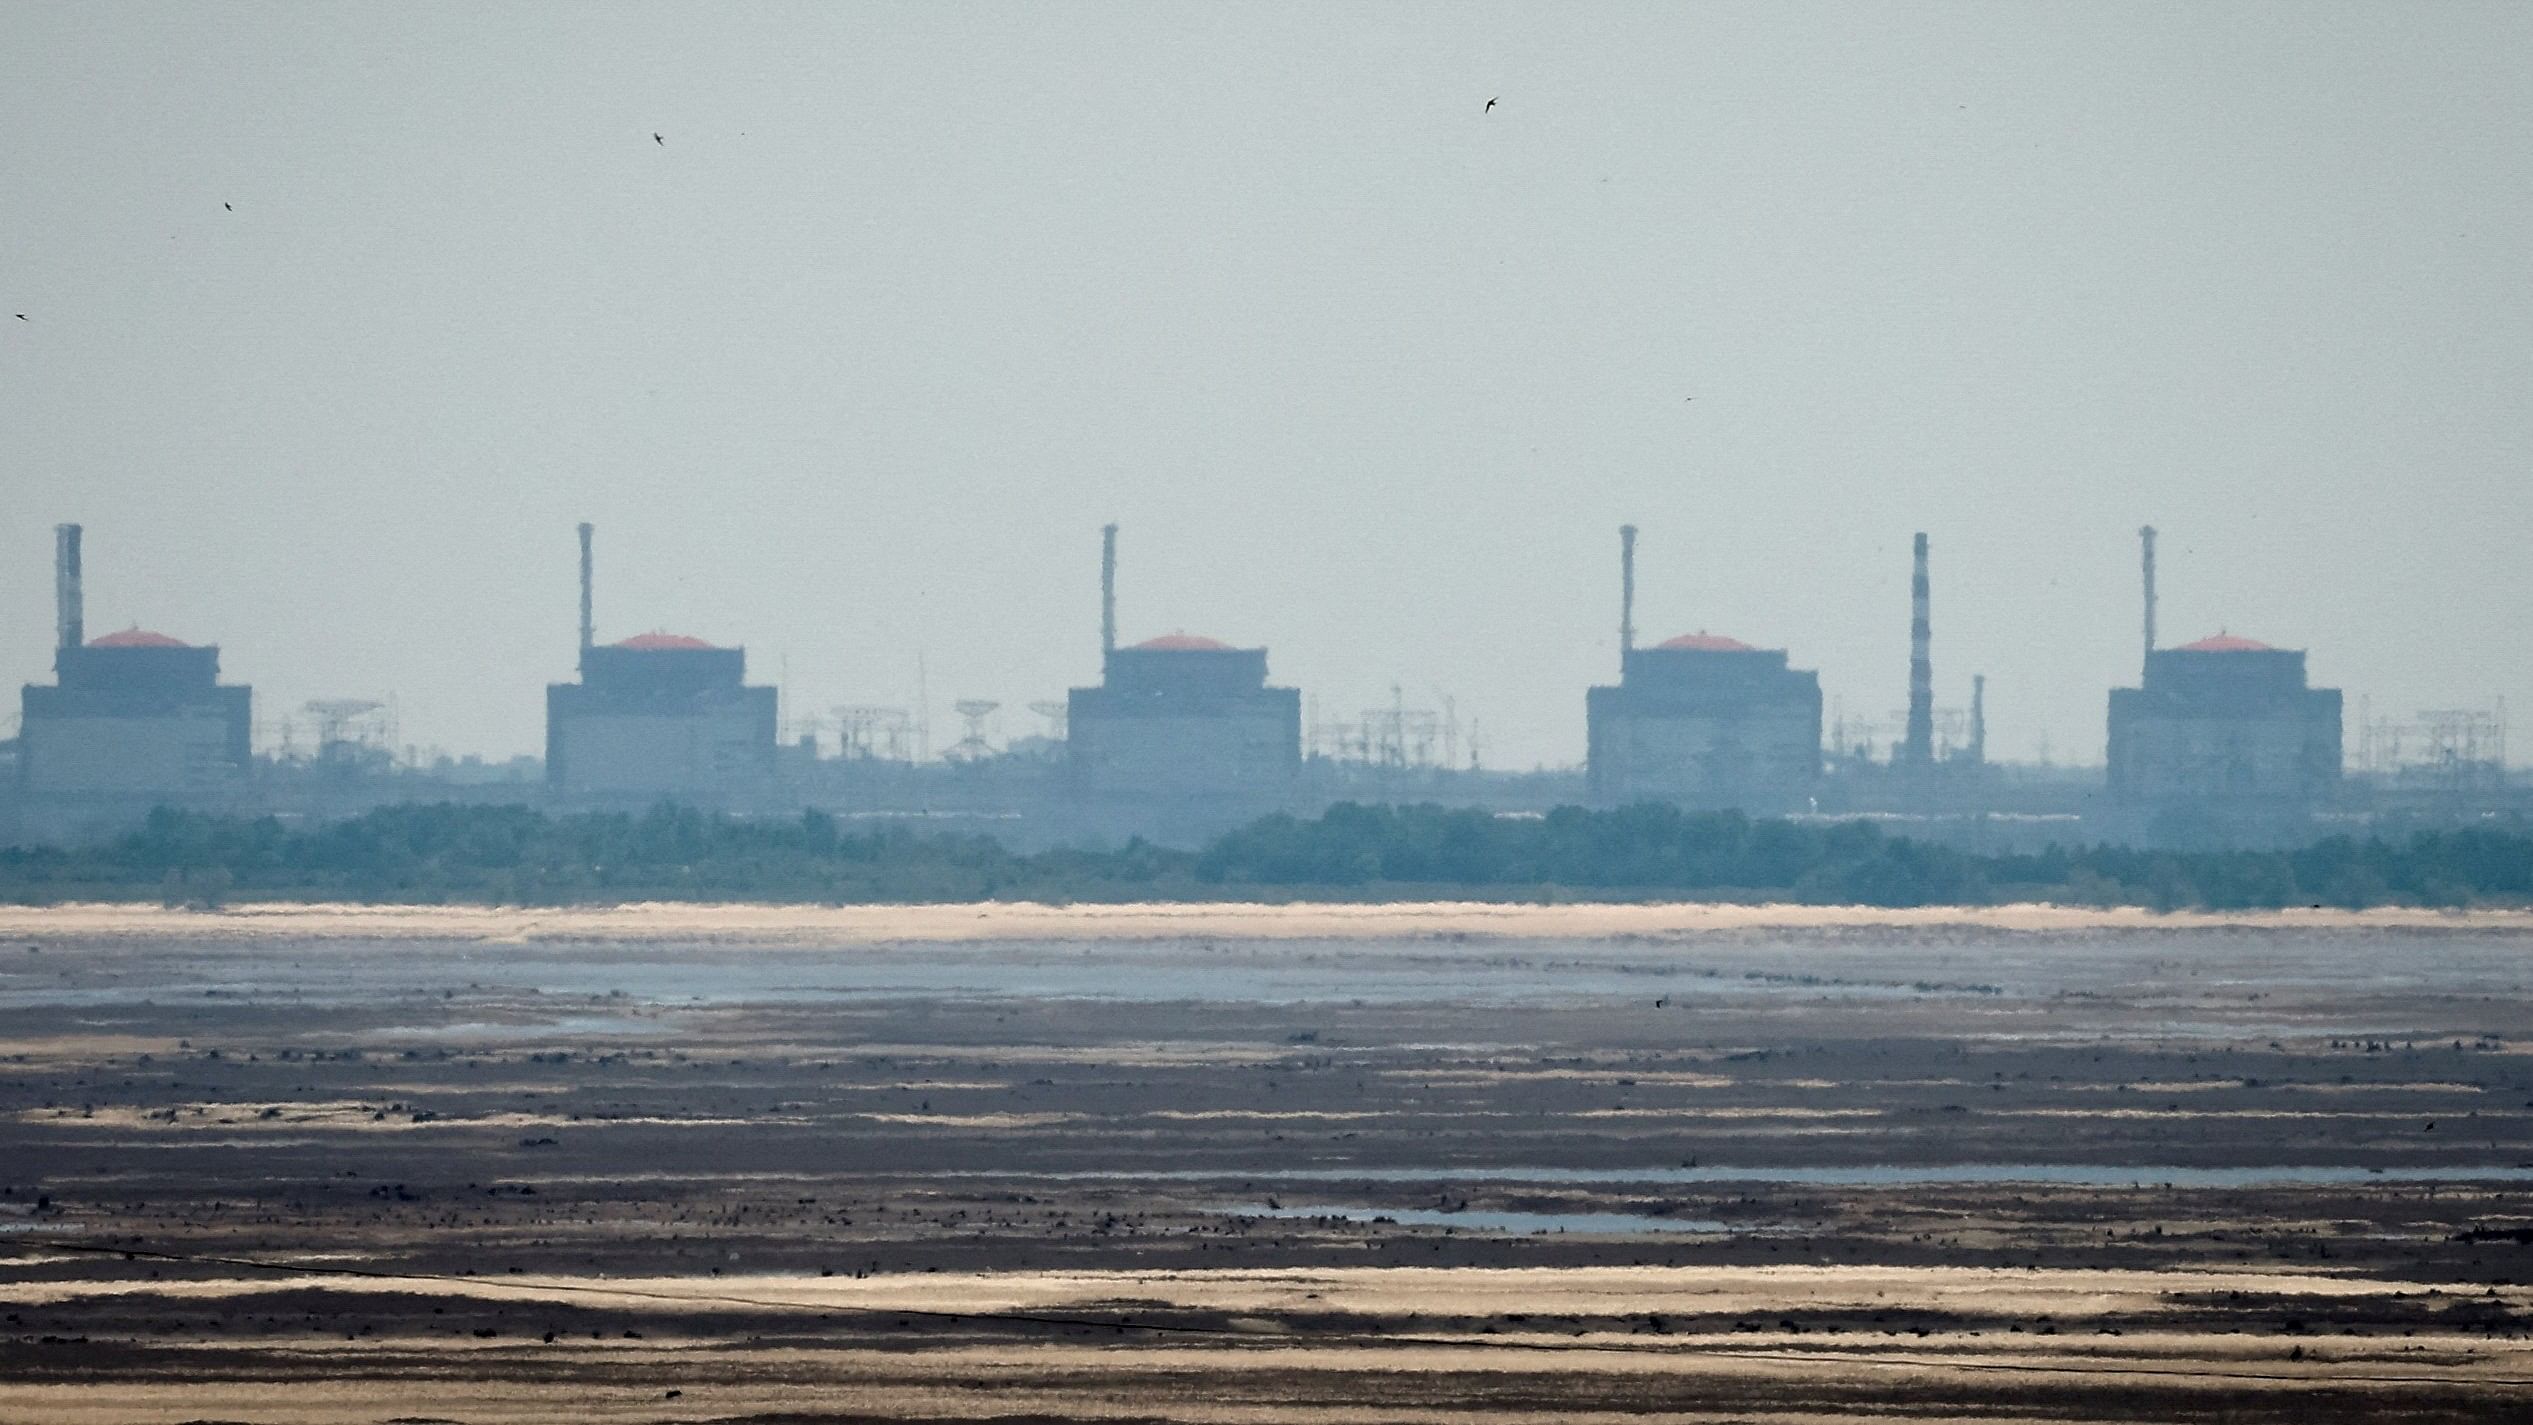 <div class="paragraphs"><p>FILE PHOTO: A view shows Zaporizhzhia Nuclear Power Plant from the bank of Kakhovka Reservoir near the town of Nikopol, in Dnipropetrovsk region, Ukraine, June 16, 2023.o</p></div>